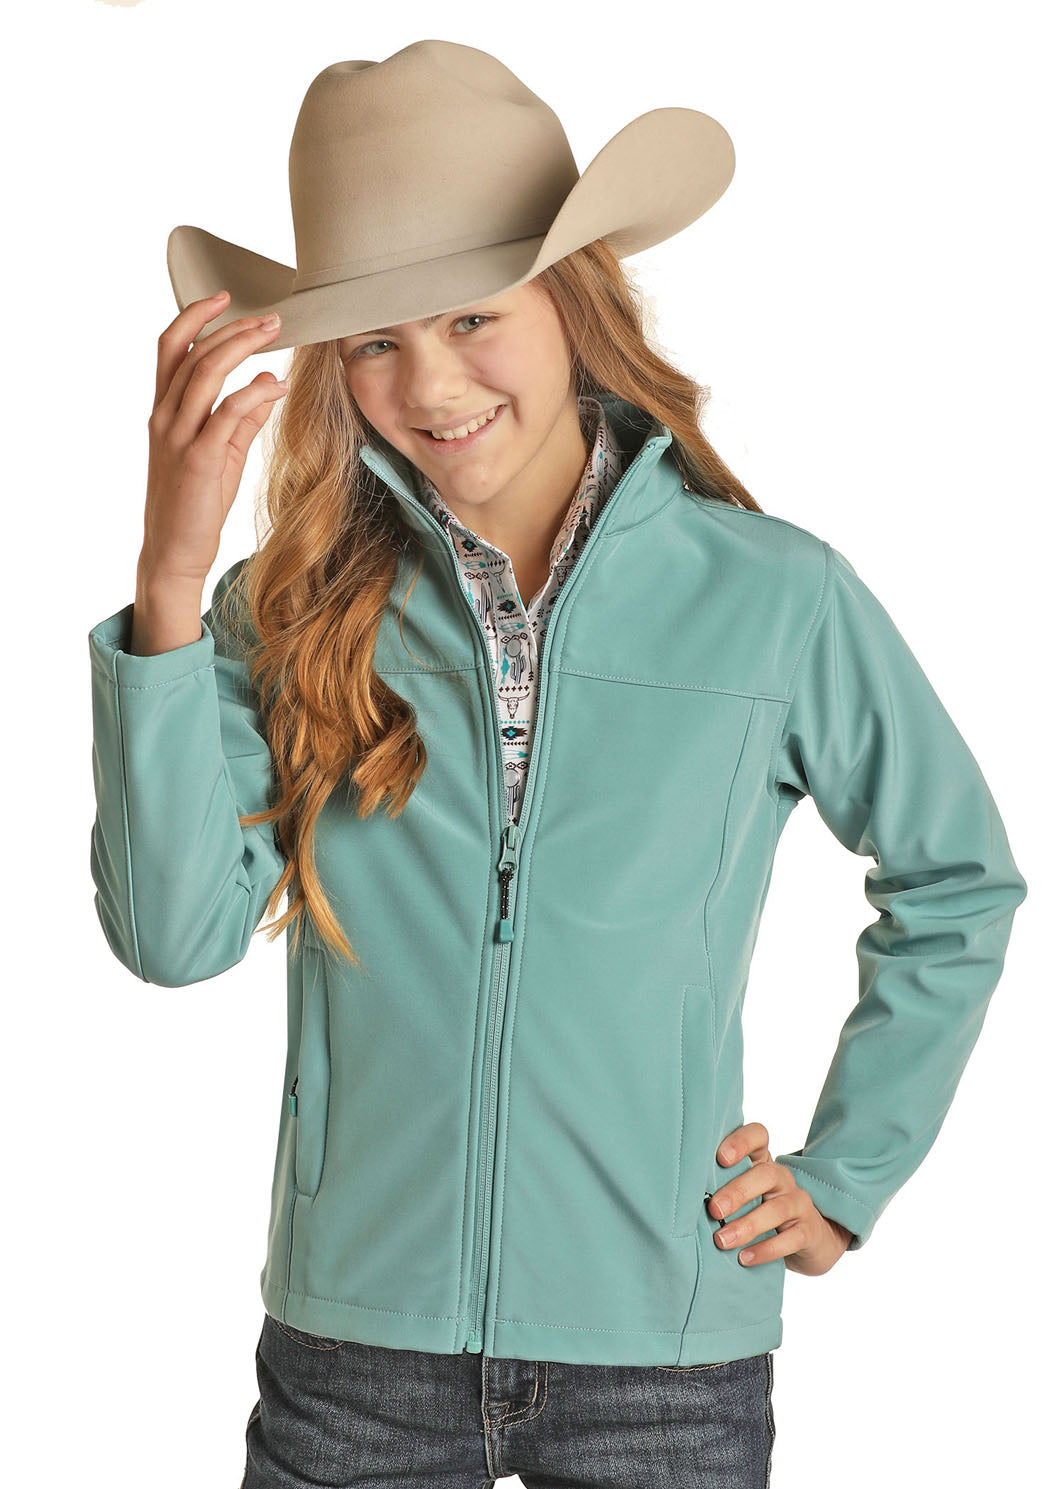 KID'S POWDER RIVER OUTFITTERS PERFORMANCE SOFTSHELL JACKET in JADE